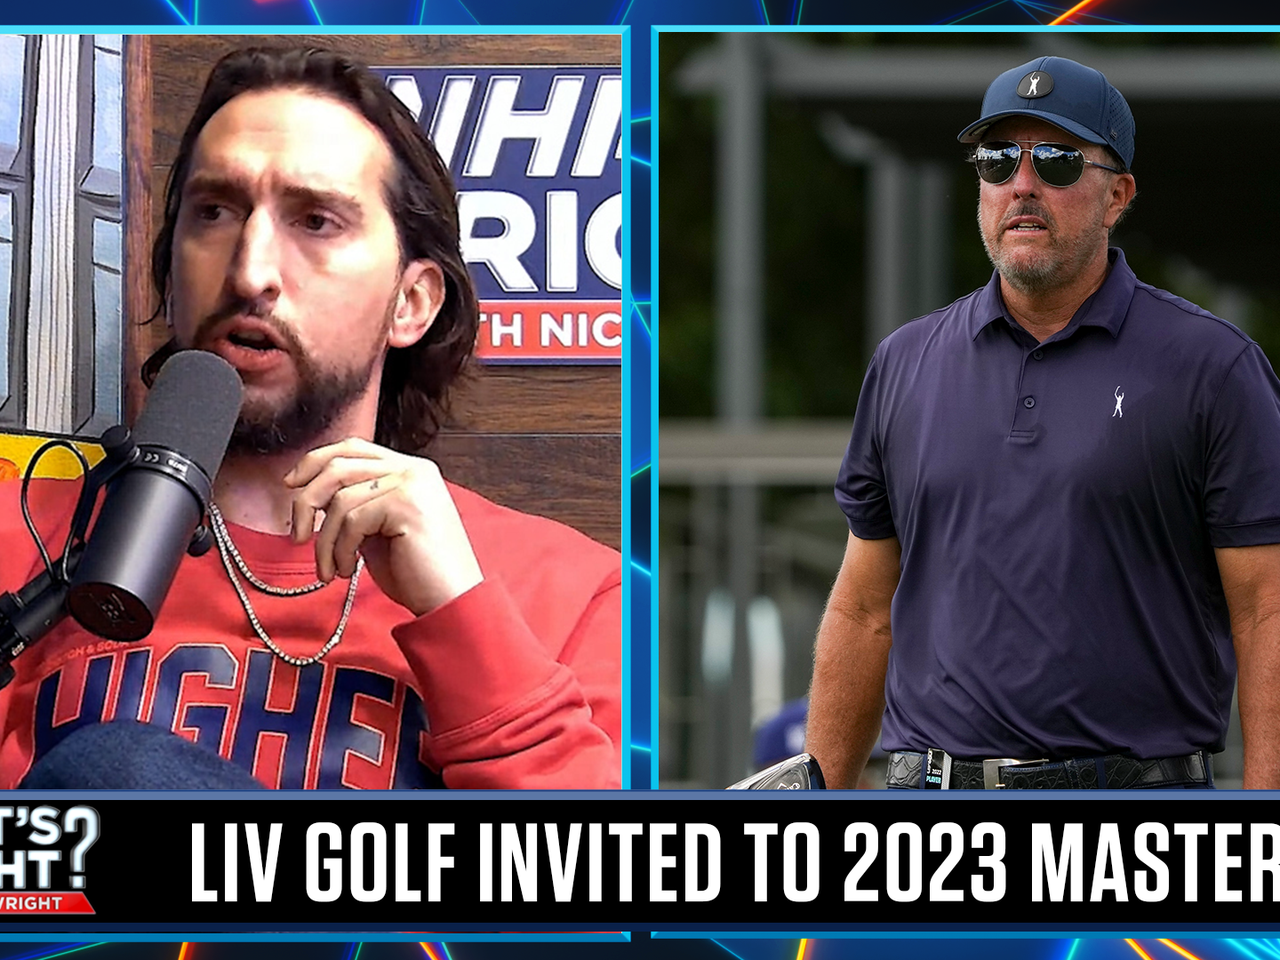 Nick reacts to the Masters allowing LIV Golf players to play in 2023 tournament Whats Wright? FOX Sports